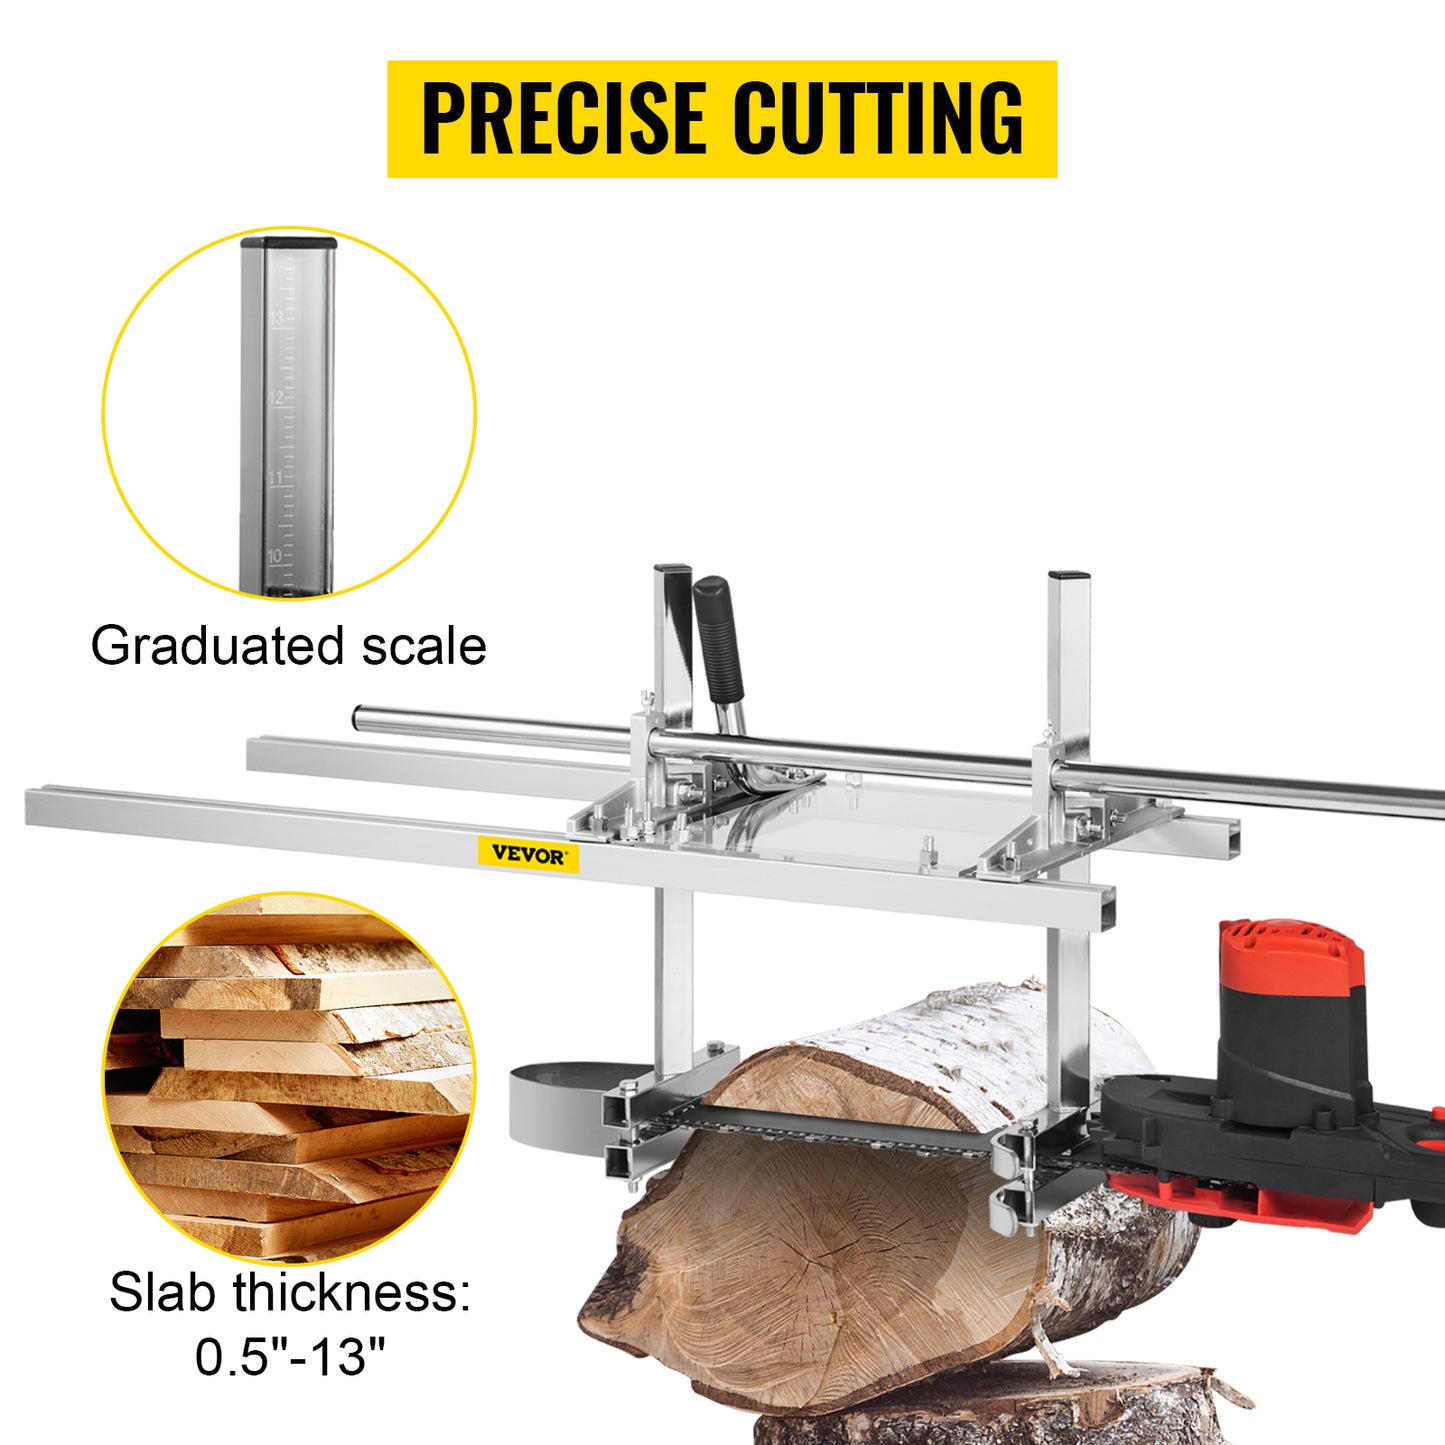 Portable Chainsaw Mill for 24, 36, and 48-inch Guide Bars, Crafting Lumber with Precision Using Aluminum and Steel Construction